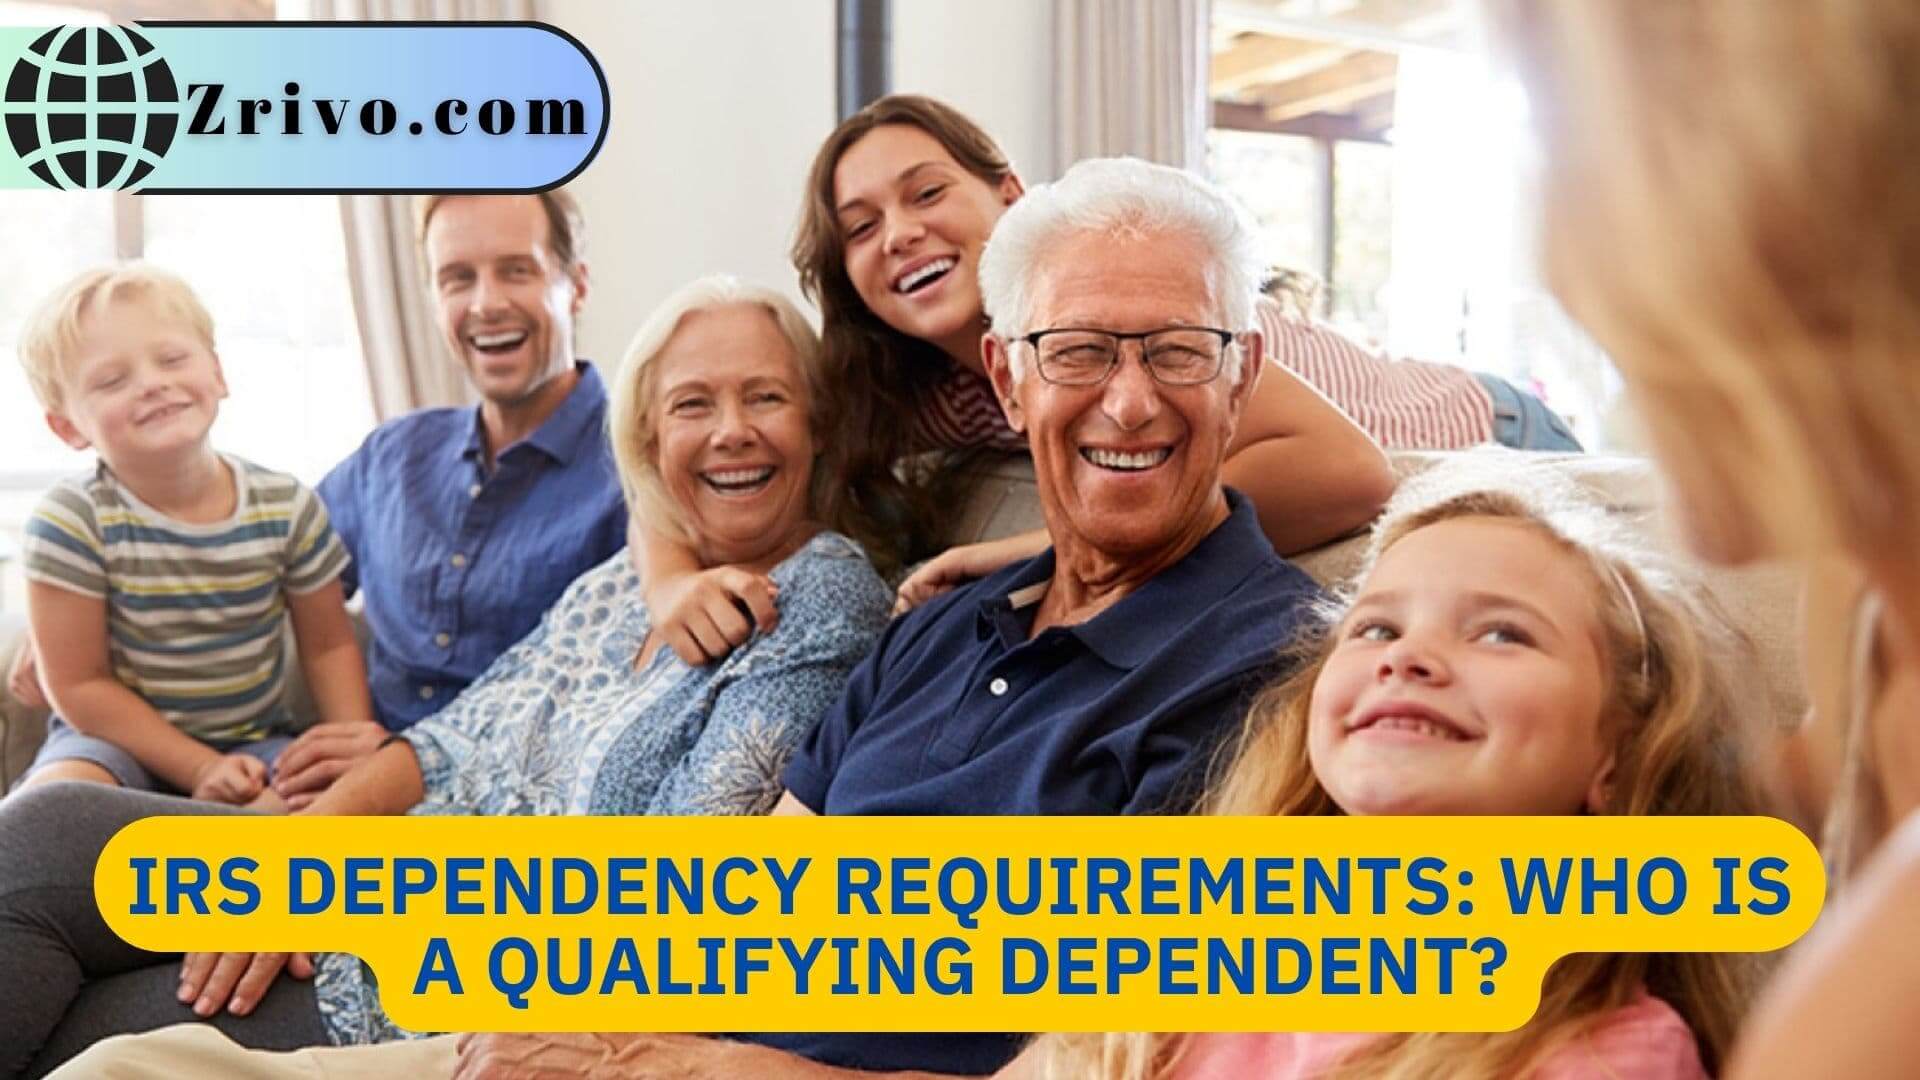 IRS Dependency Requirements: Who is a Qualifying Dependent?